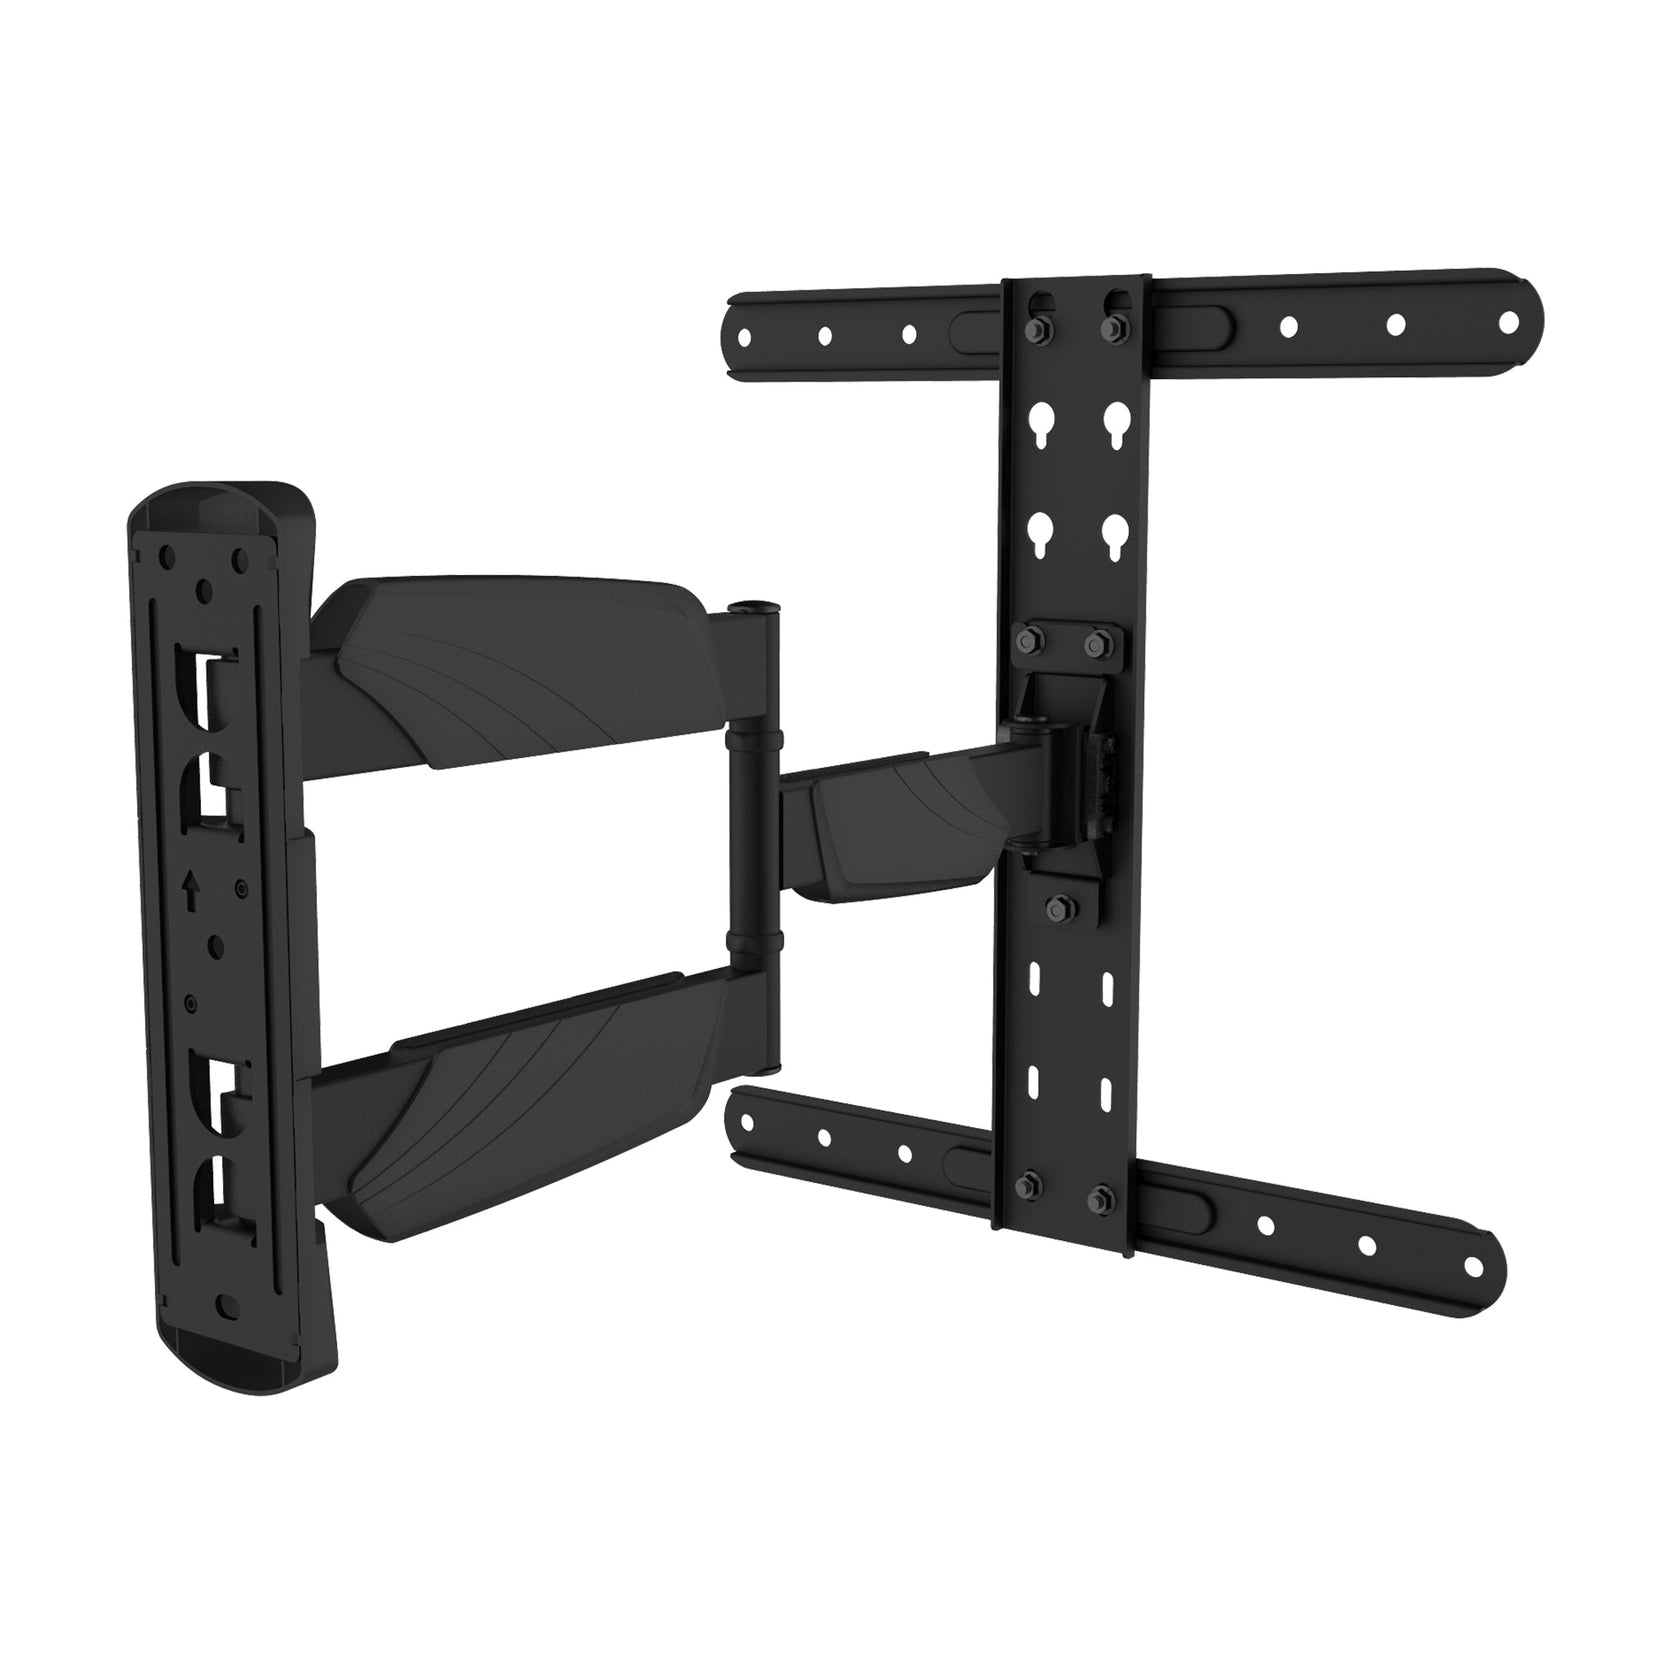 ProMounts MA441 Full Motion TV Wall Mount for 32”- 60” Screens